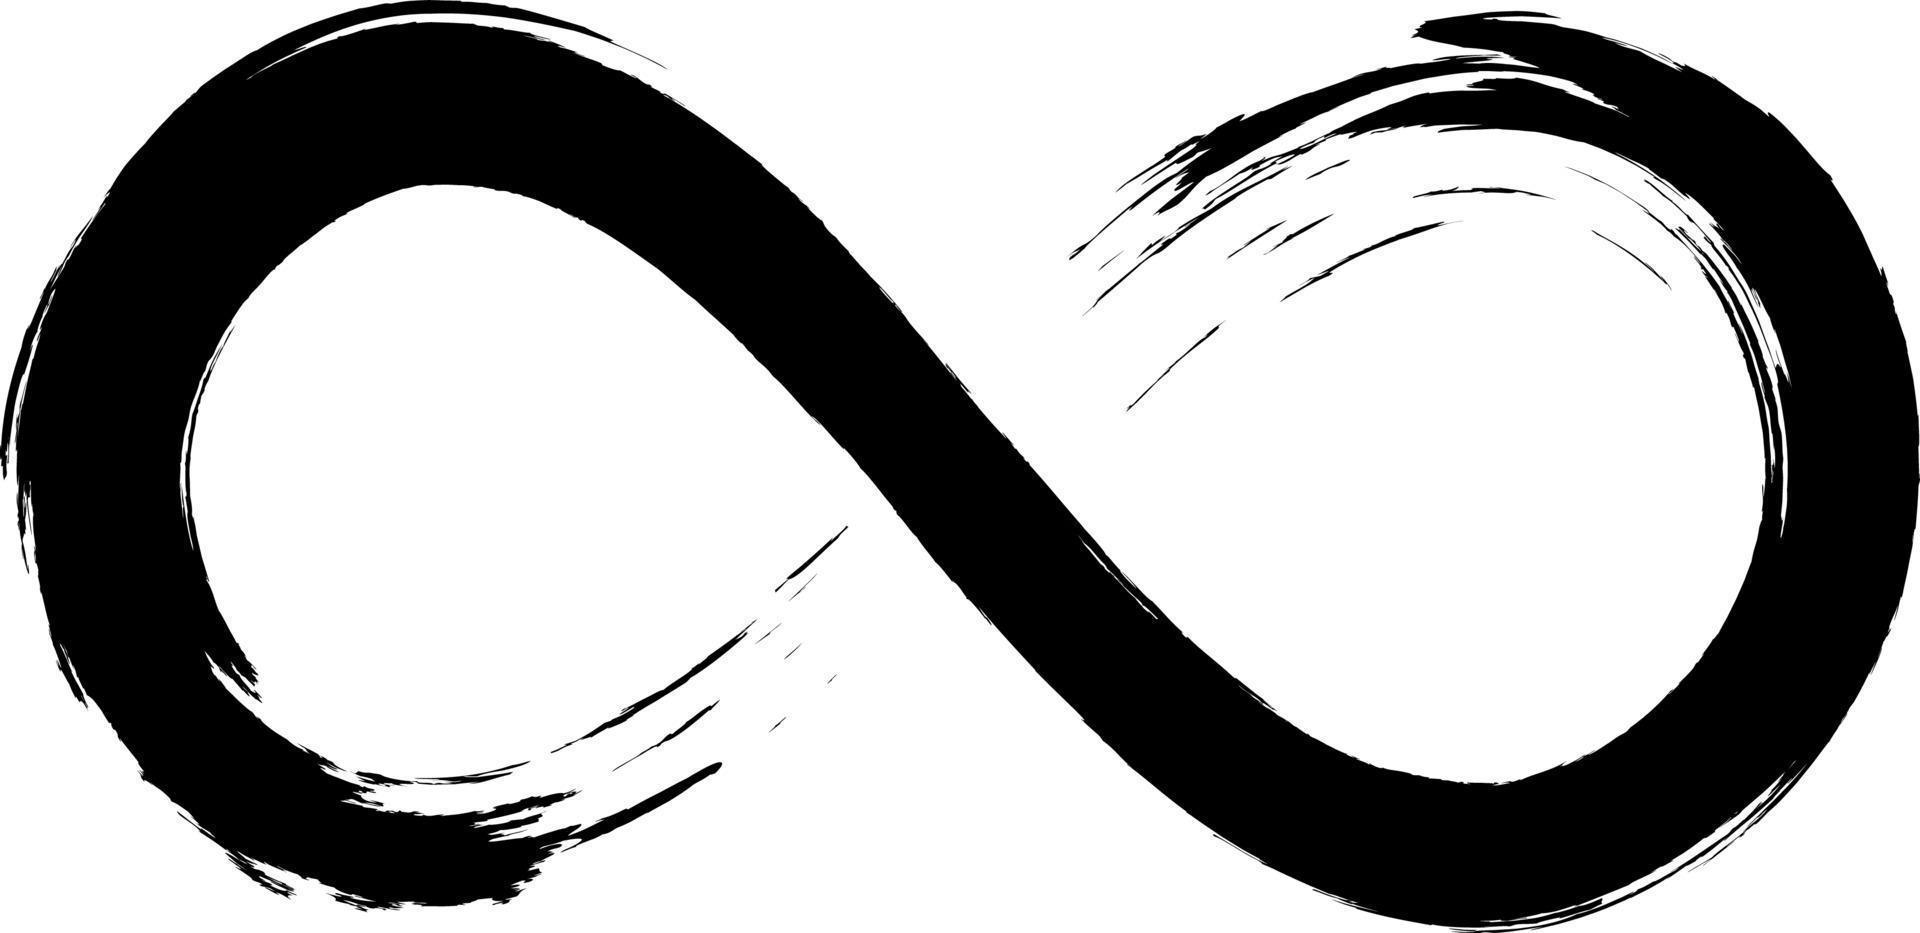 Grunge infinity symbol. Hand painted with black paint. Grunge brush stroke. Modern eternity icon. Graphic design element. Infinite possibilities, endless process. vector